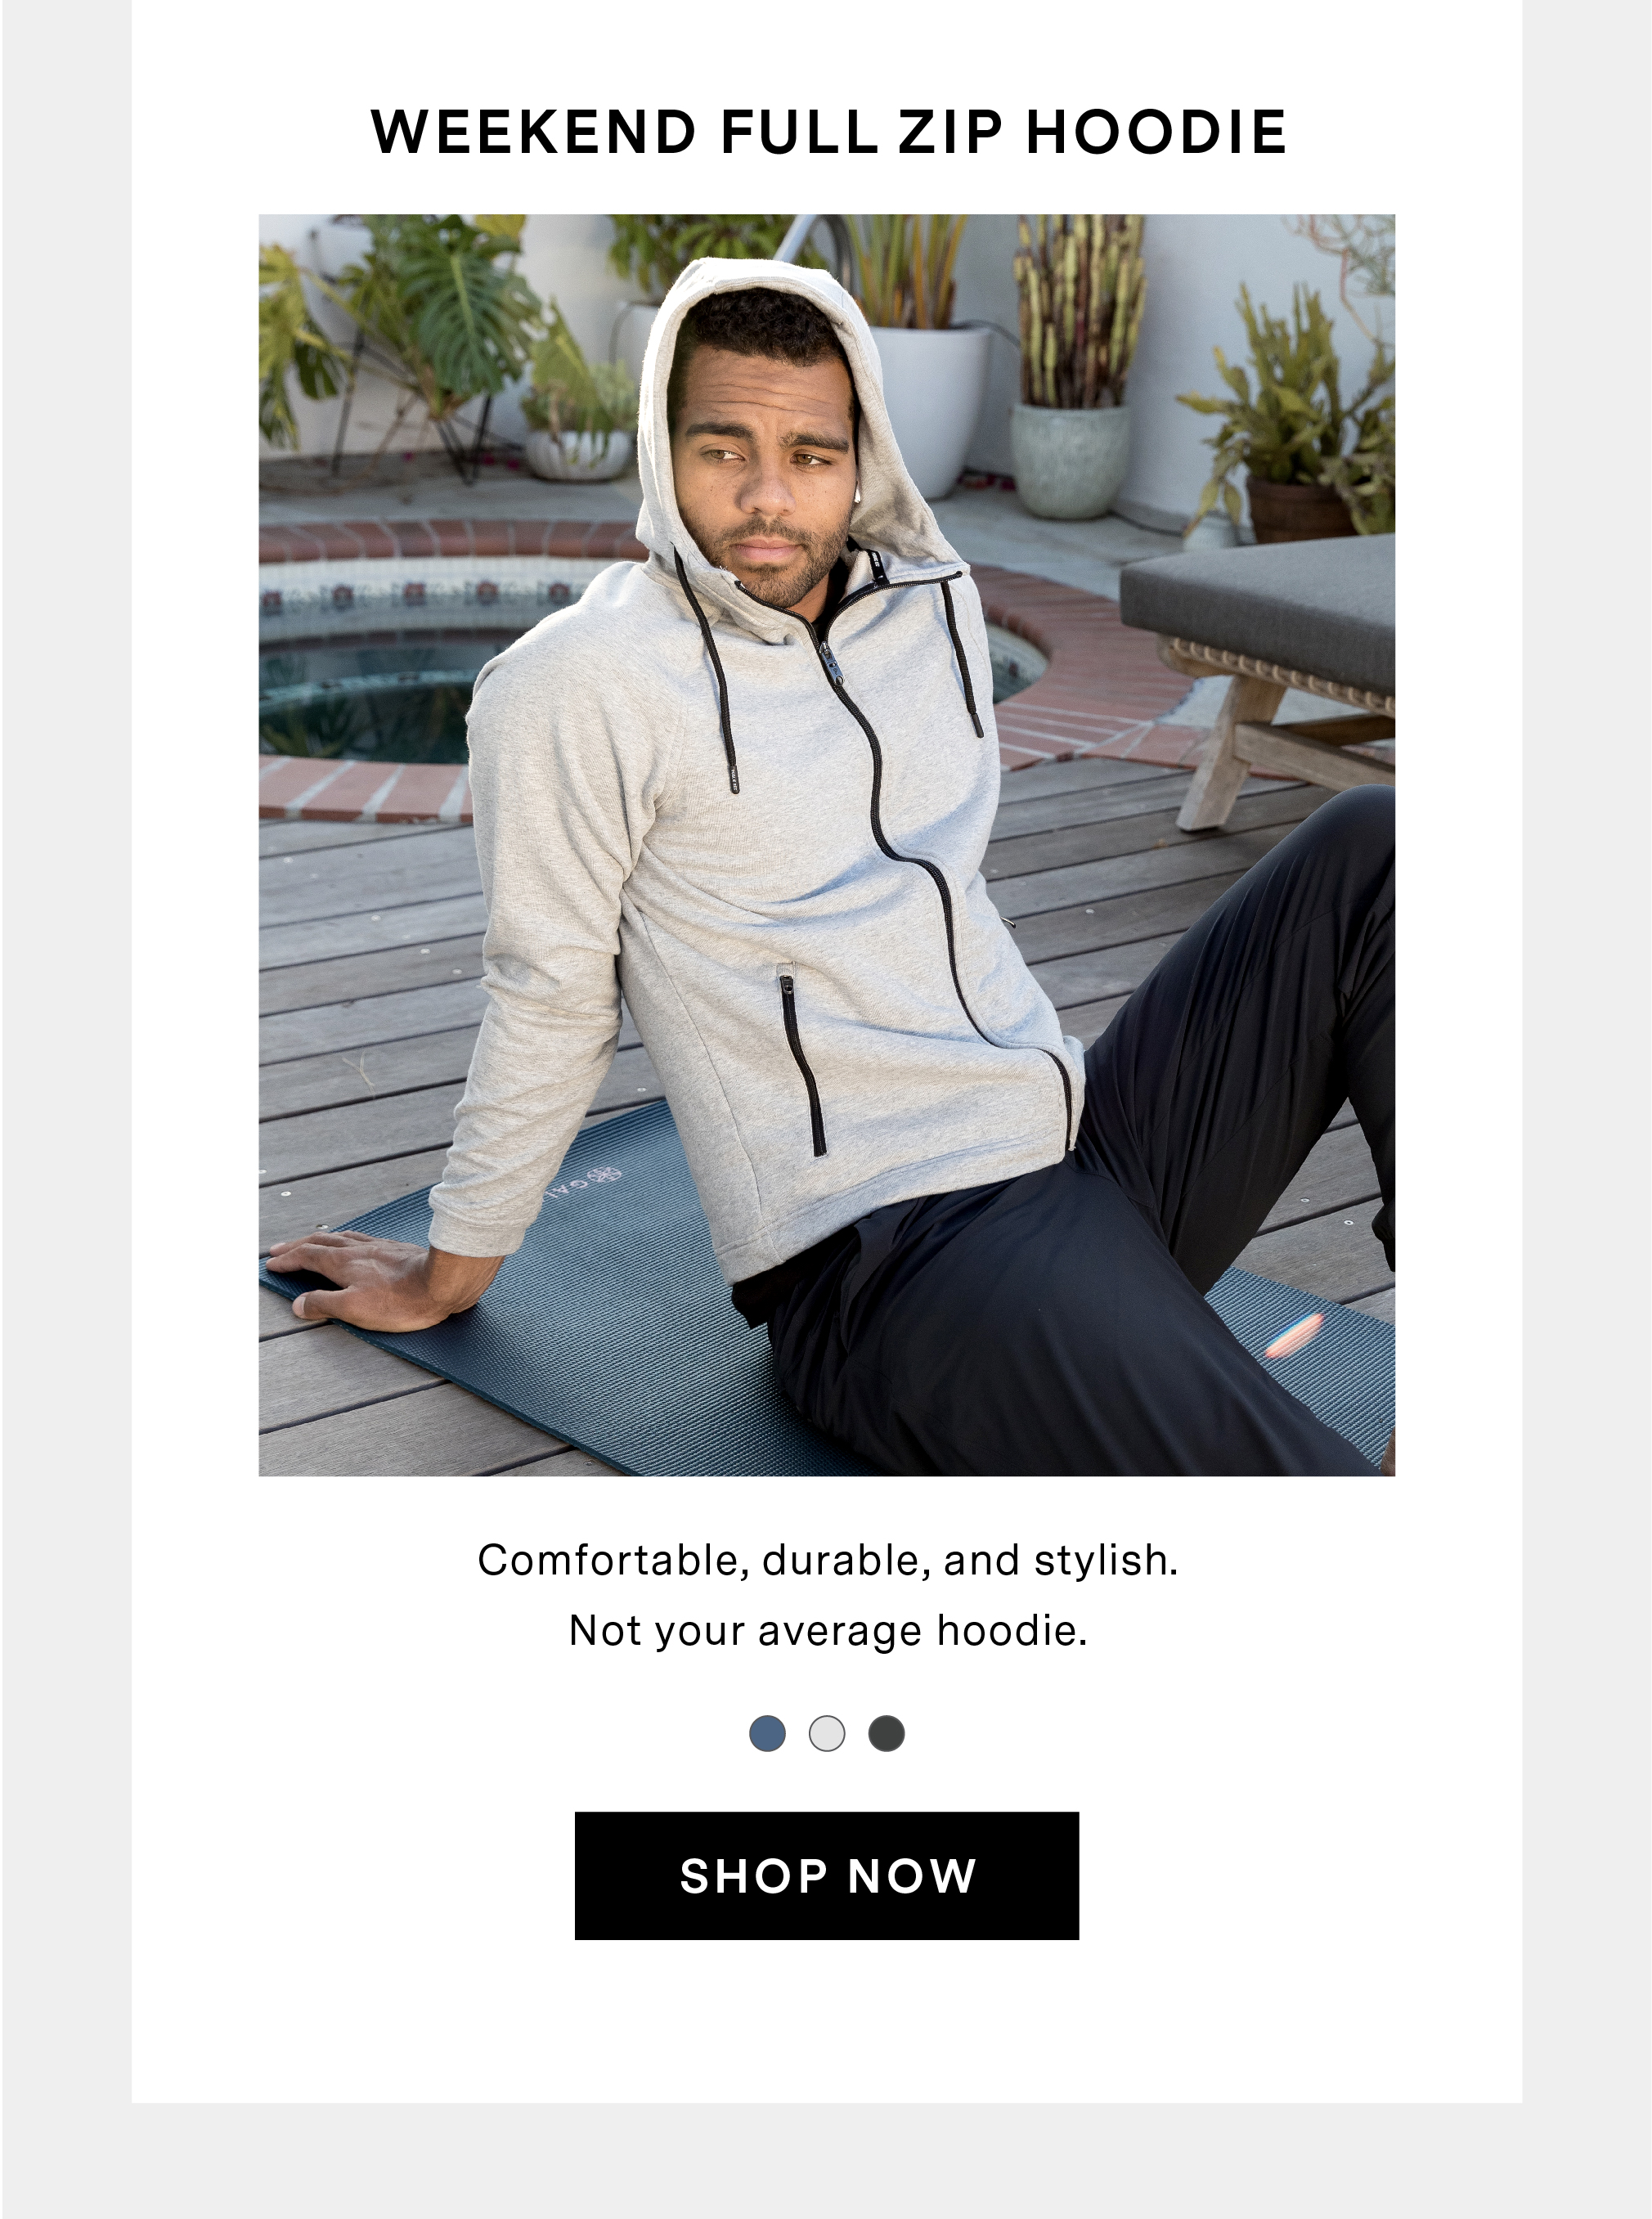 Weekend Full Zip Hoodie - Comfortable, durable, and stylish. Not your average hoodie.